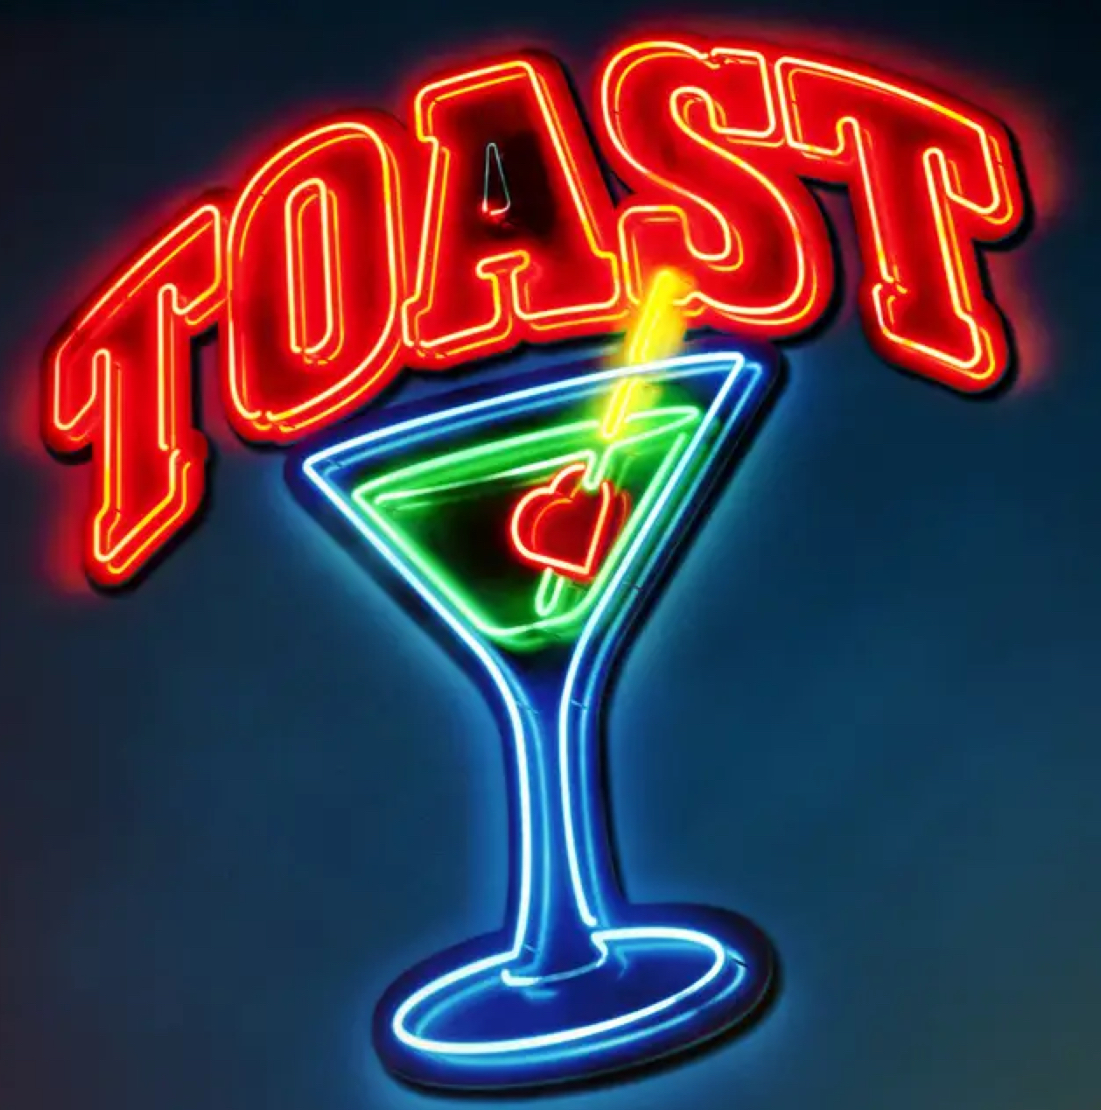 Peter Fox featuring reezy — Toast 🍸 cover artwork